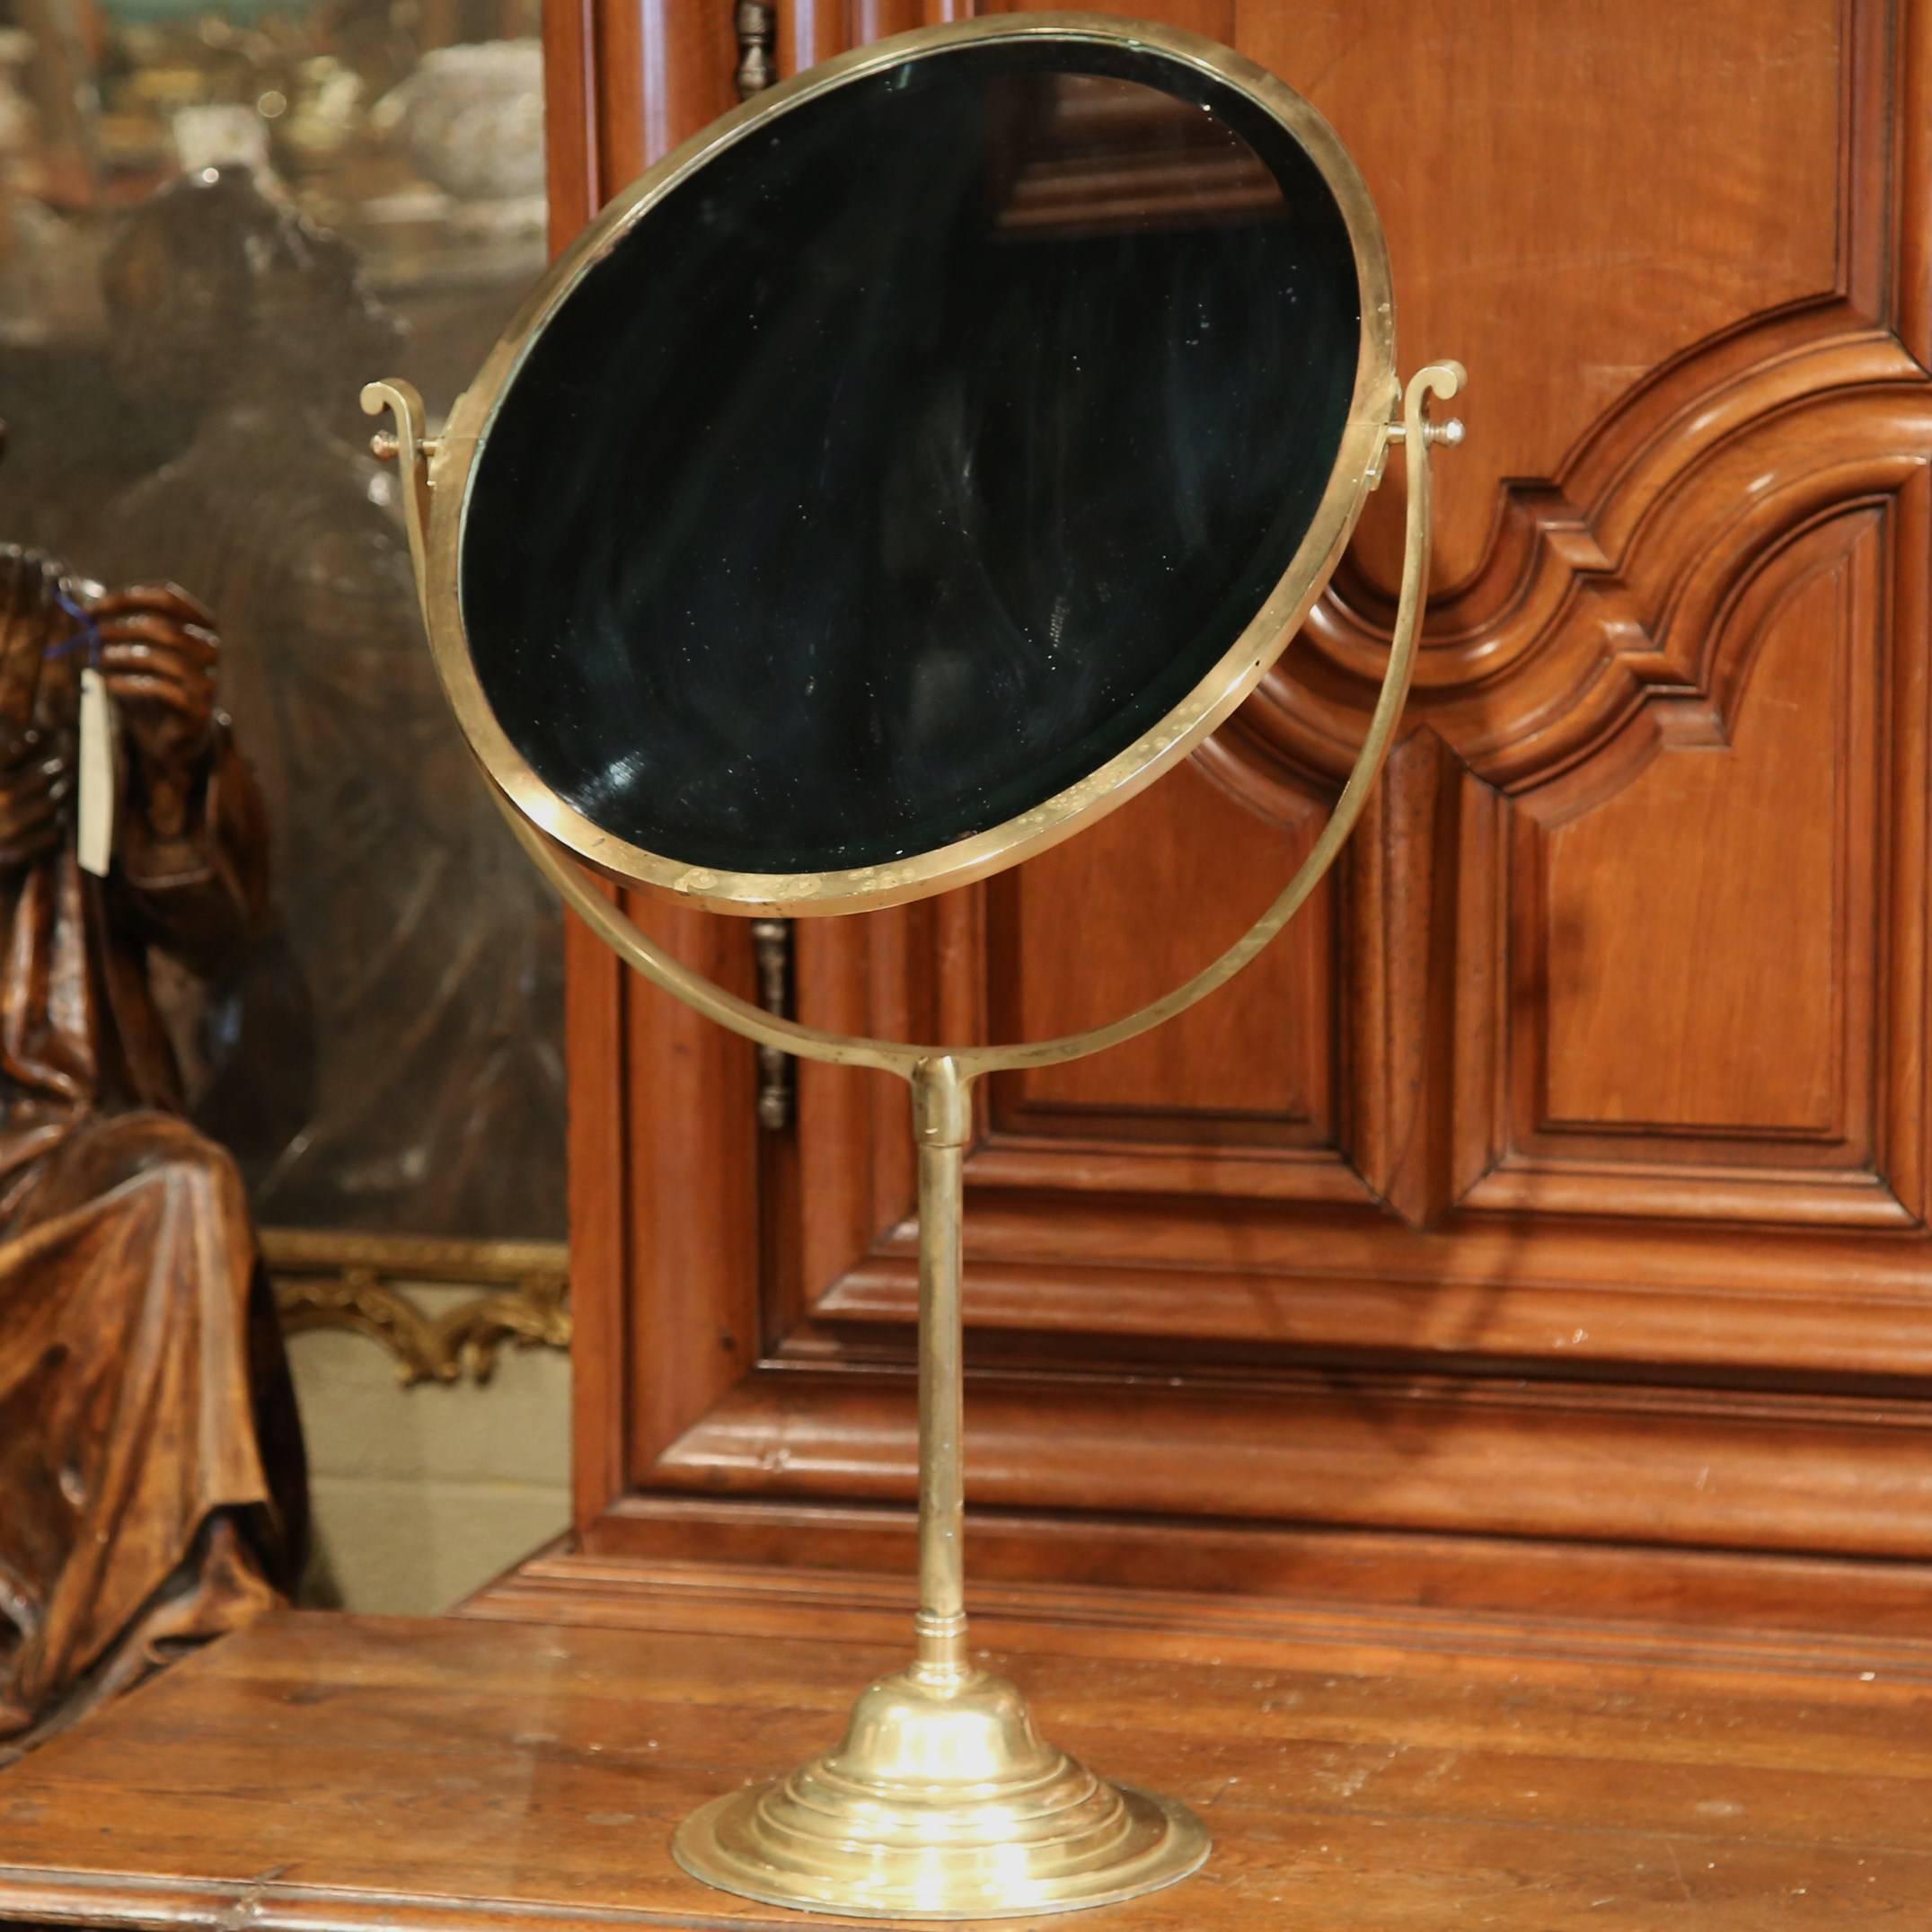 This exceptional, antique table mirror was crafted in France circa 1860. The elegant bronze piece sits on a single pedestal grounded with a round base. The mirror has a double sided, oval beveled glass that can be flipped as needed. Very good